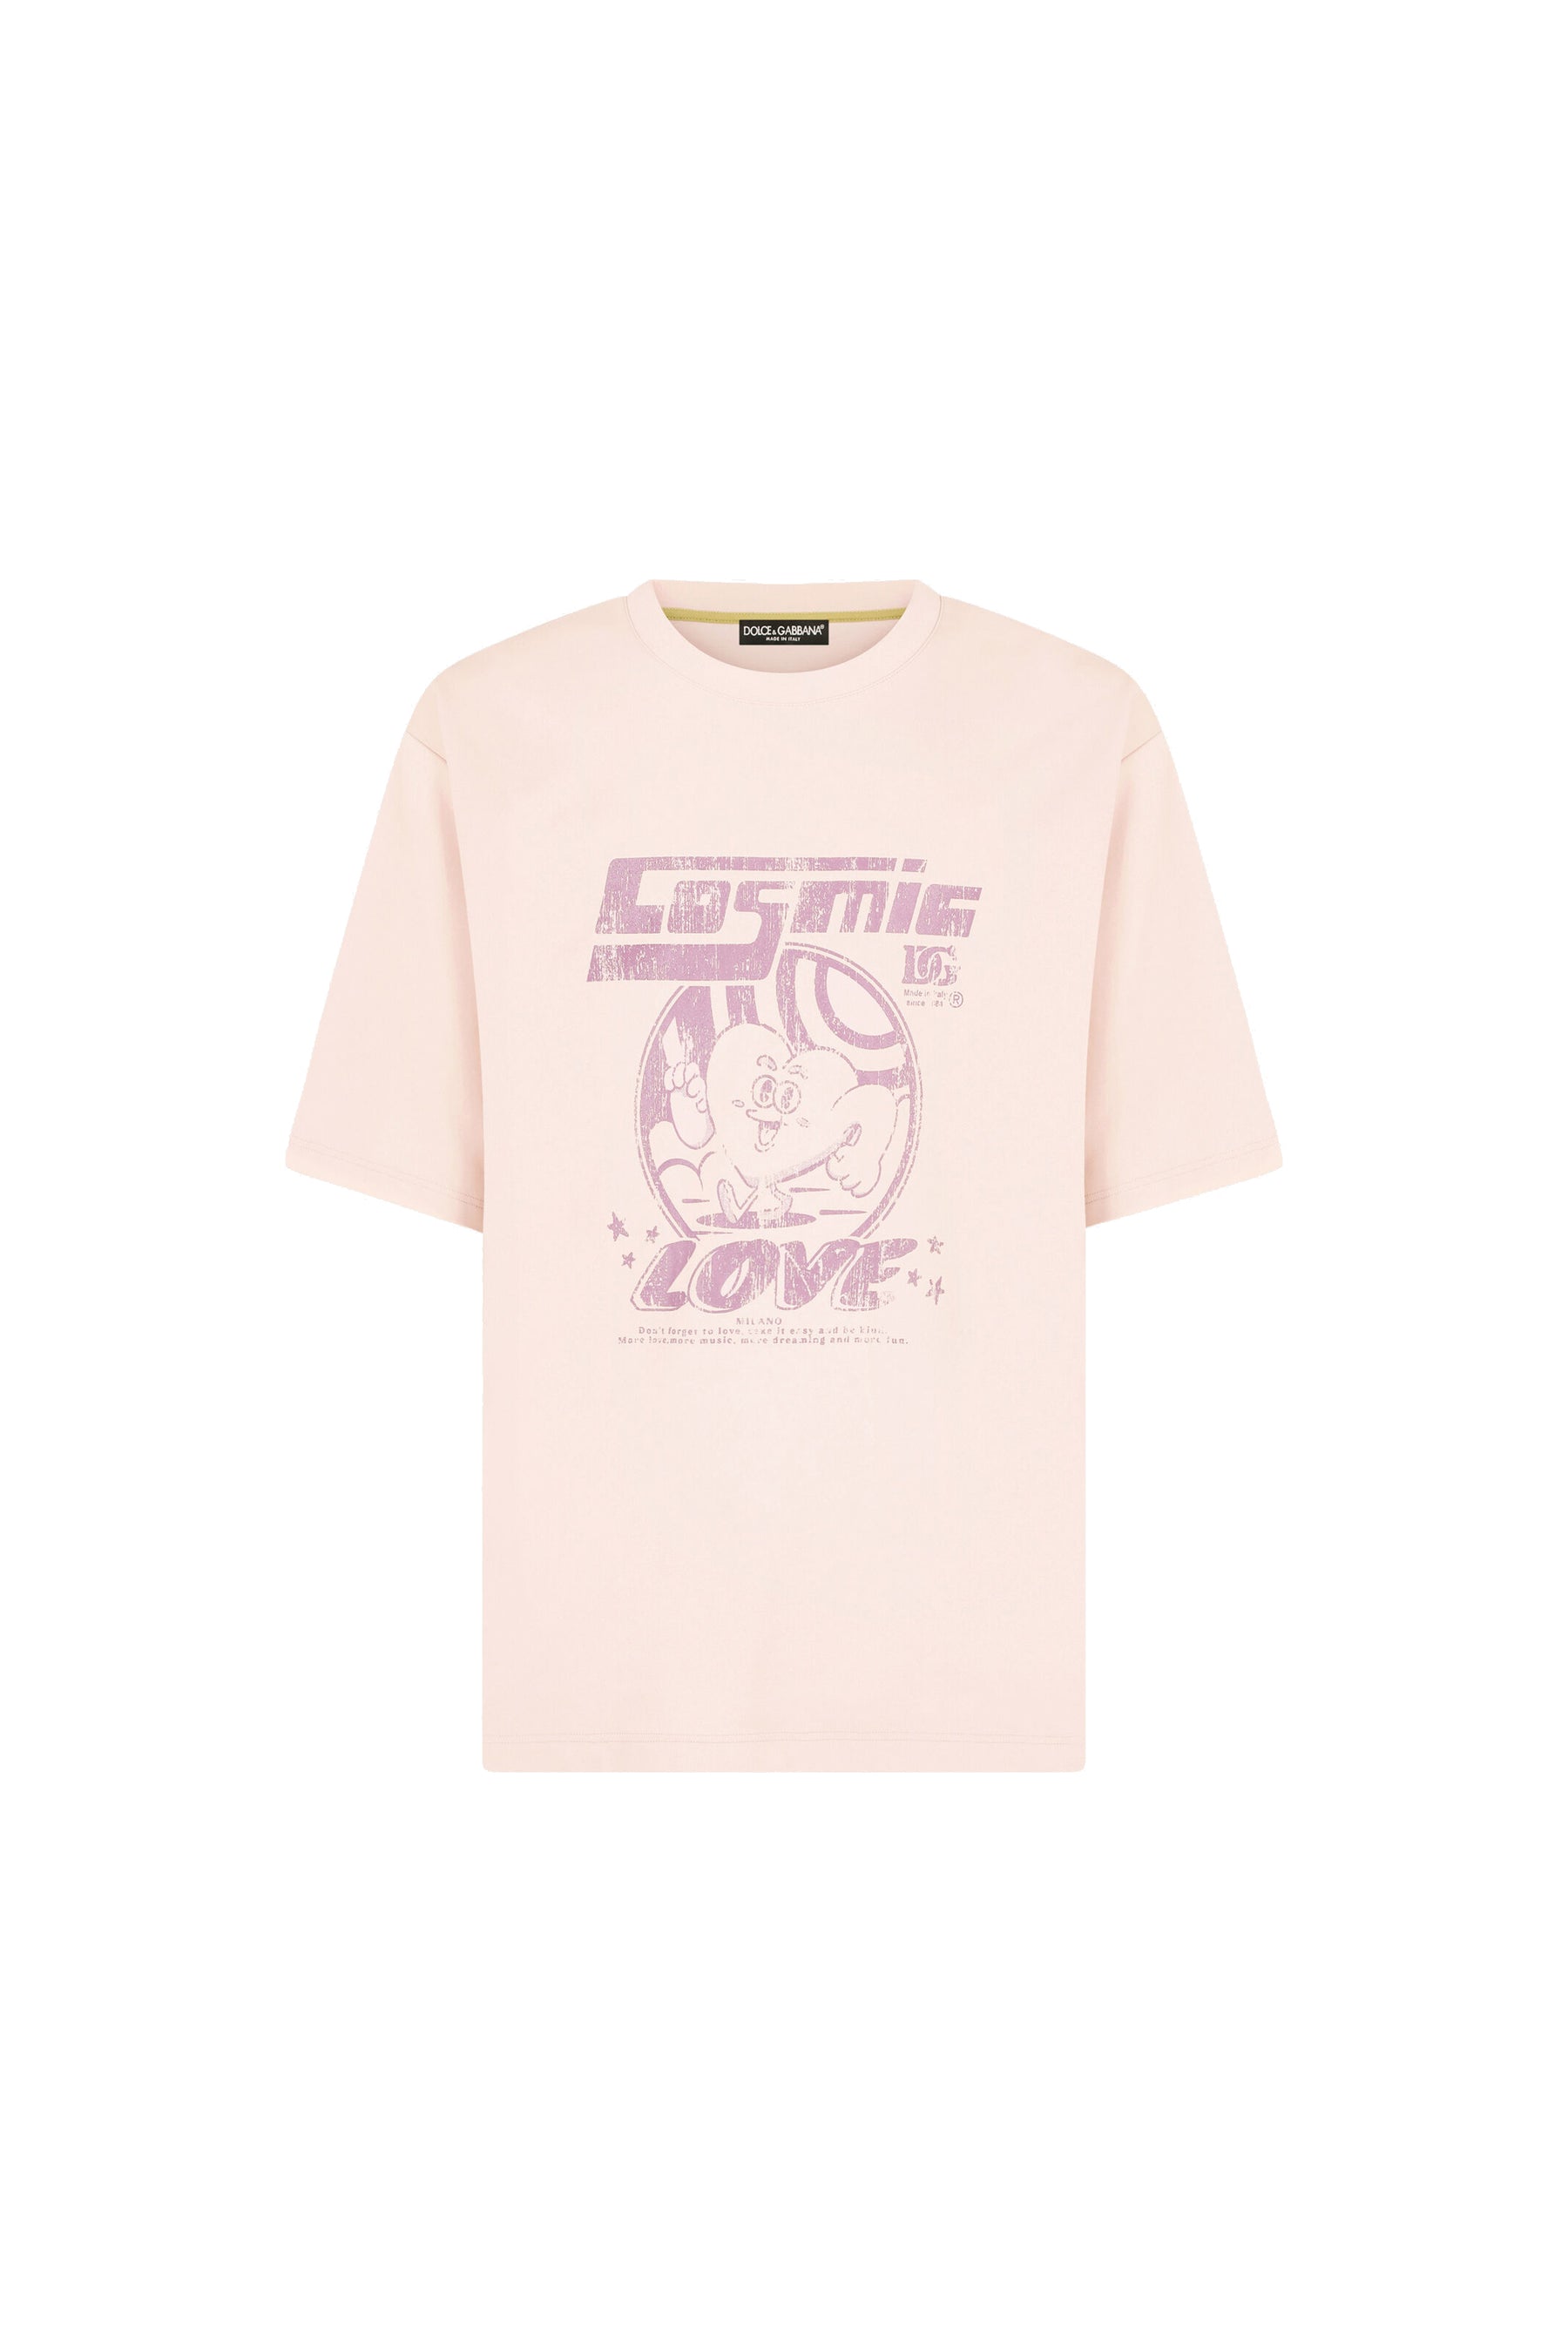 Dolce & Gabbana Pink Printed cotton T-shirt with patch embellishment